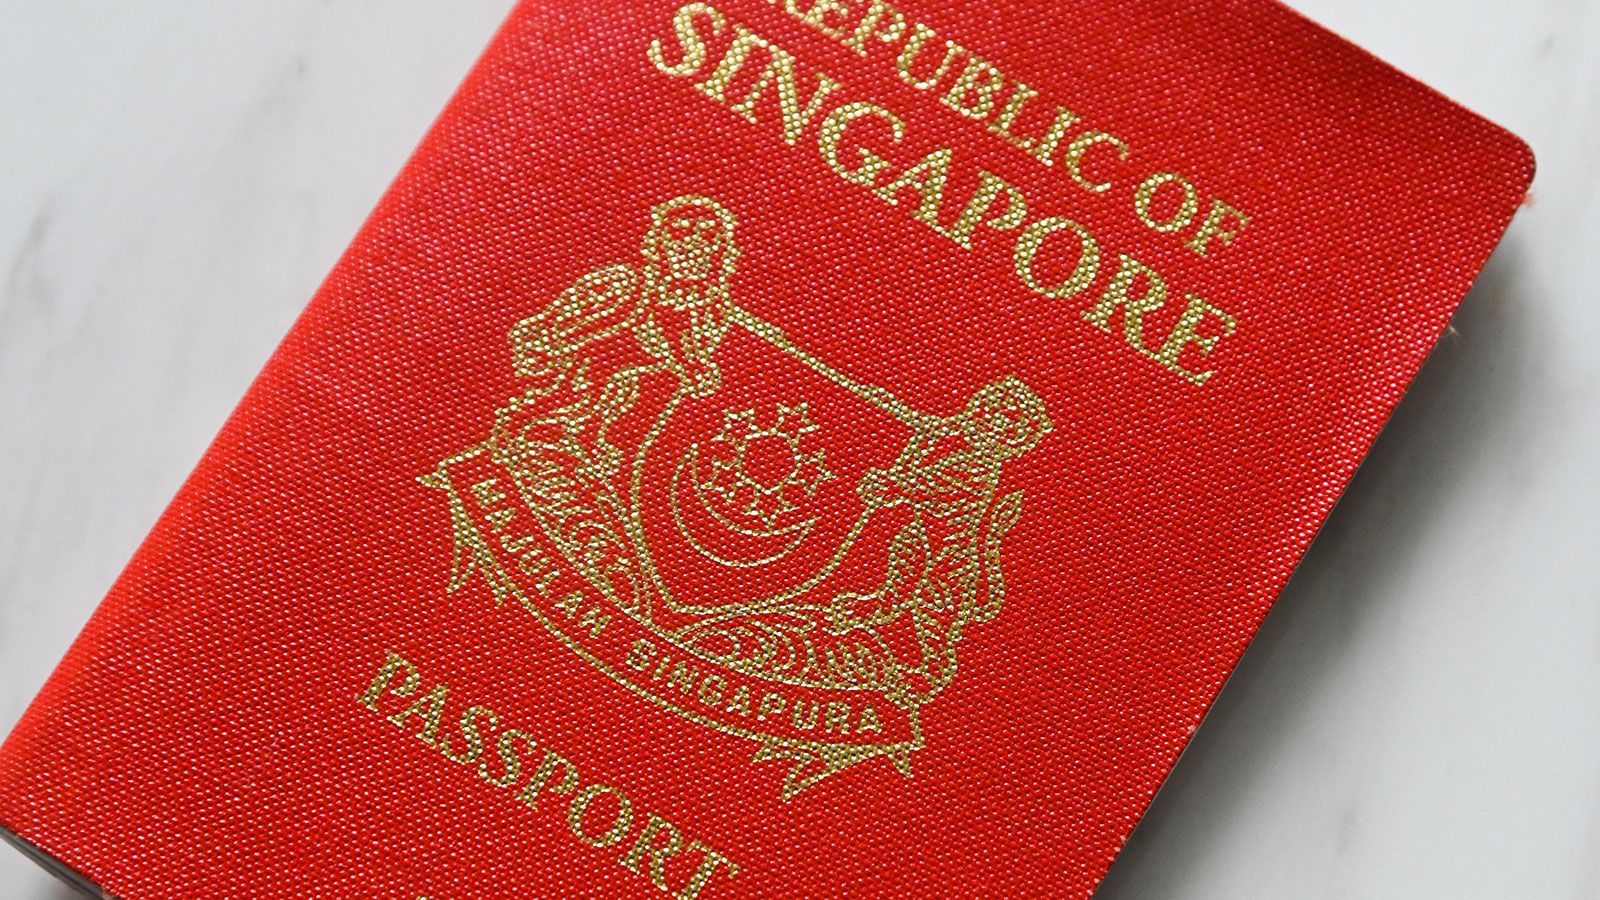 The 10 Most Powerful Passports in the World (2023)